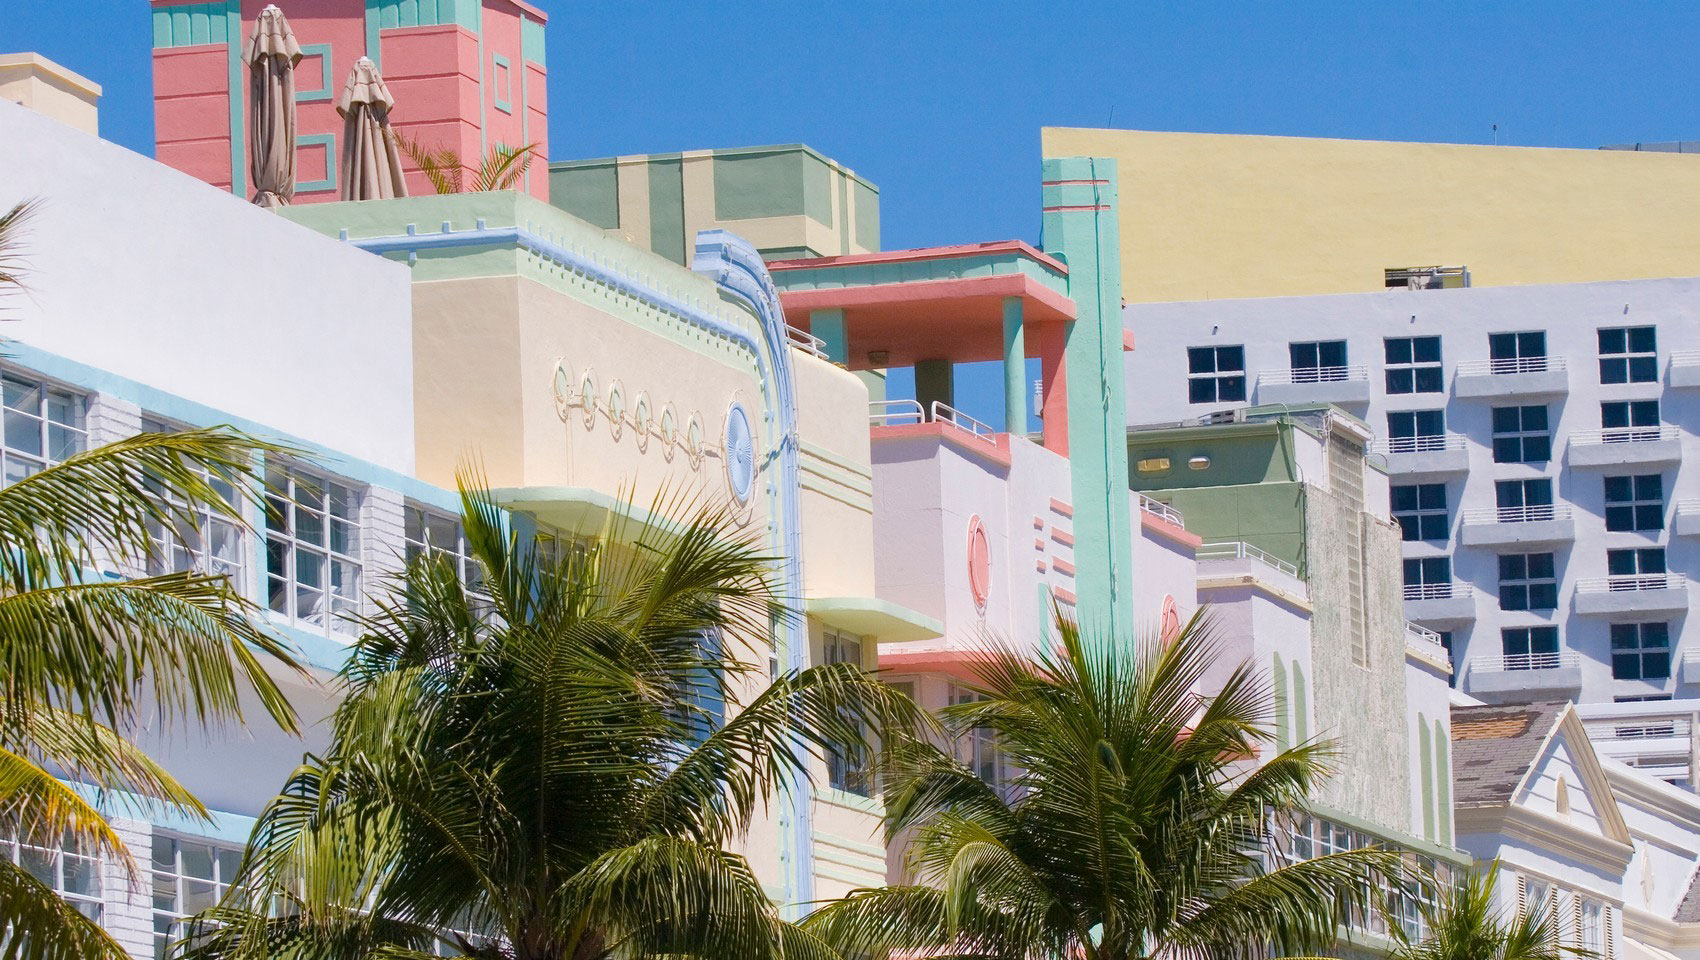 Art Deco District Miami: The largest architectural cluster Art Deco in the world